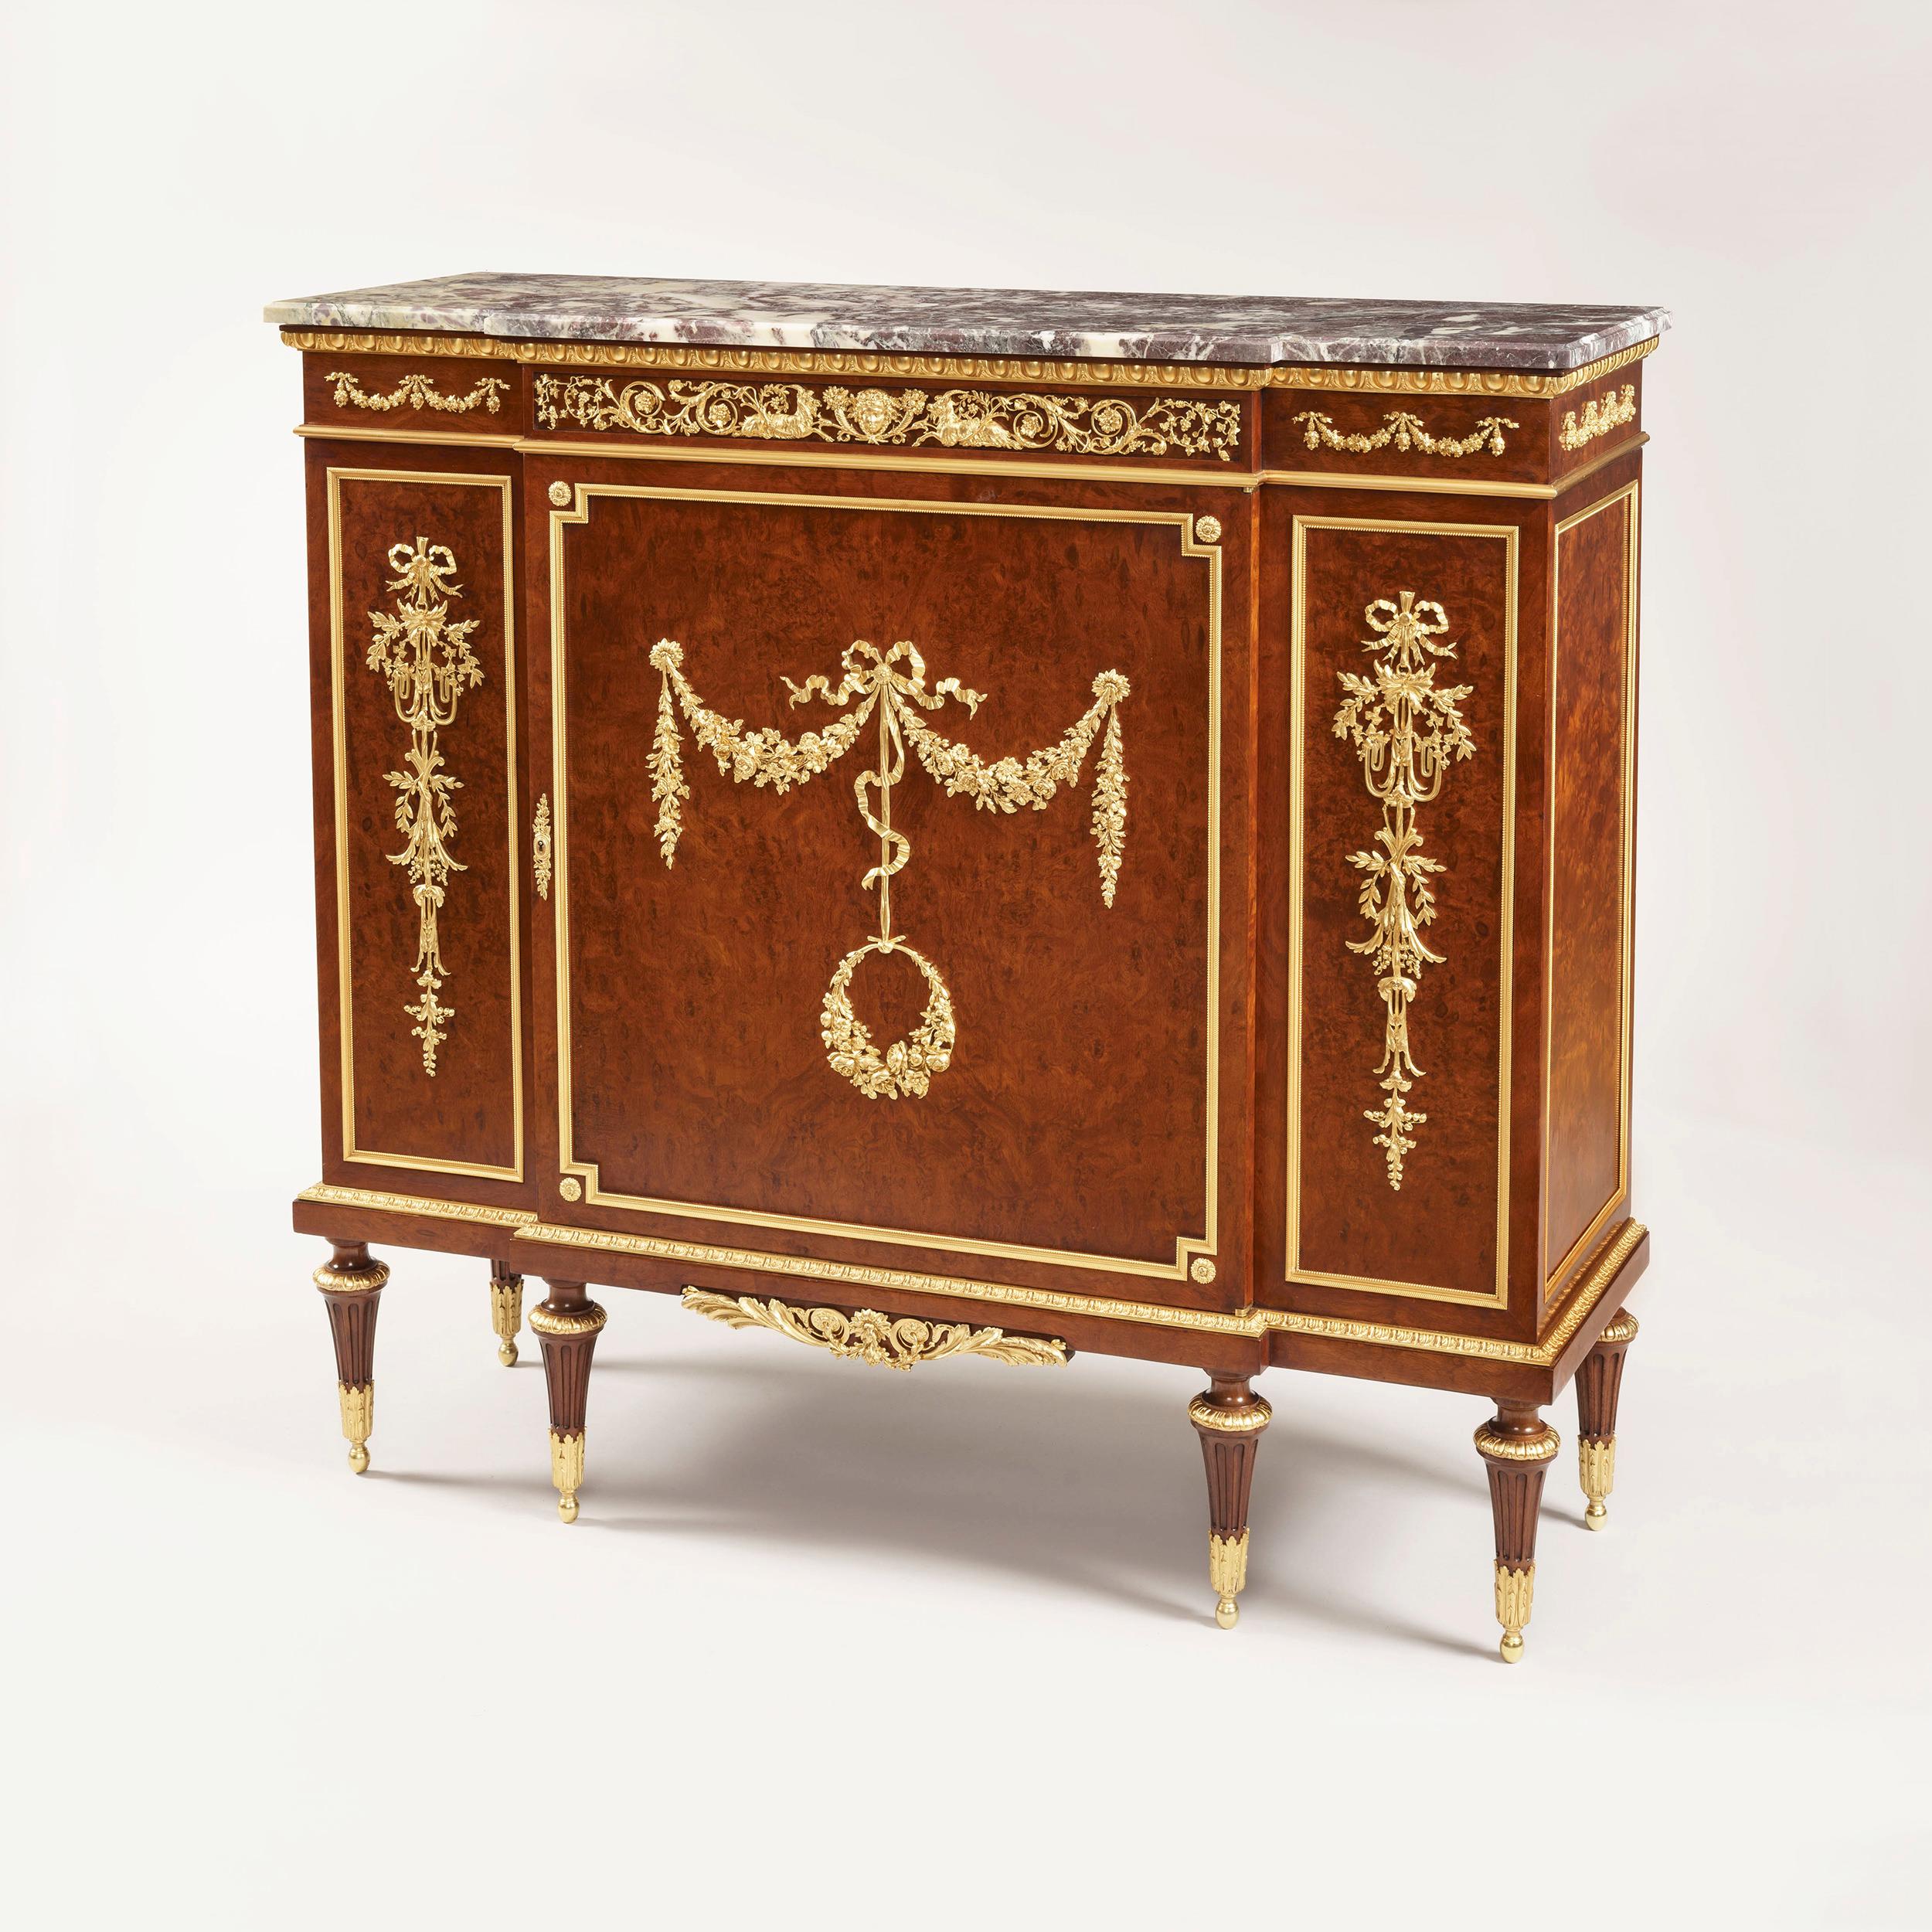 A fine side cabinet by François Linke

In the Louis XVI manner, of gentle breakfronted form, constructed in thuya, and adorned with bronze doré mounts of the finest quality; rising from turned and tapering cannelure and leaf cast ormolu clasps,